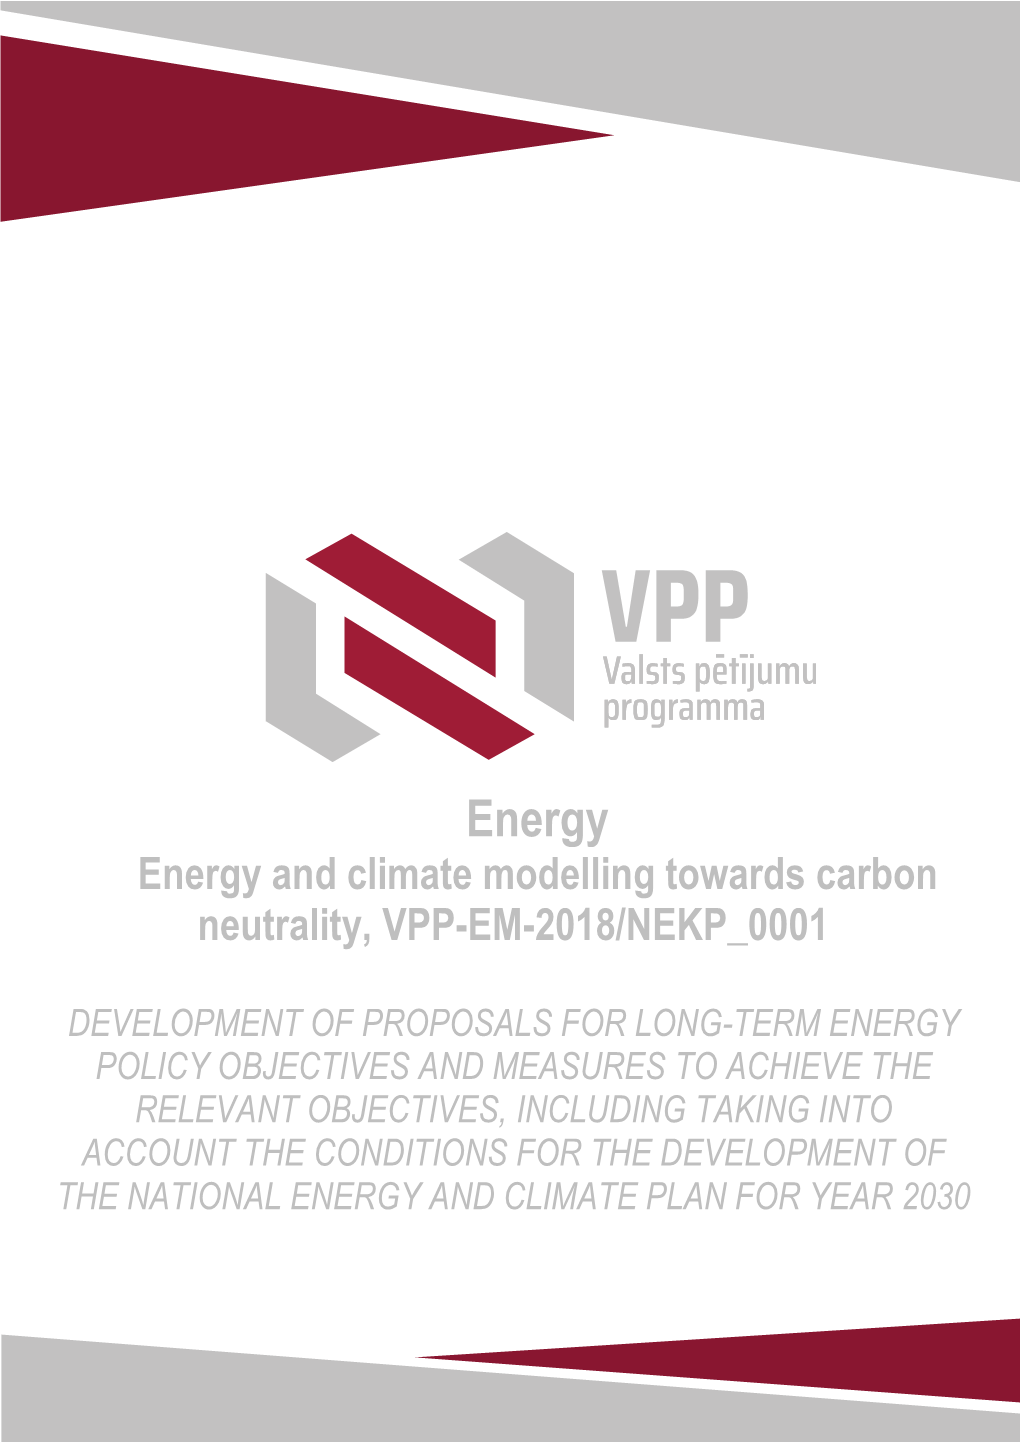 Development of Proposals for Long-Term Energy Policy Objectives and Measures to Achieve the Relevant Objectives